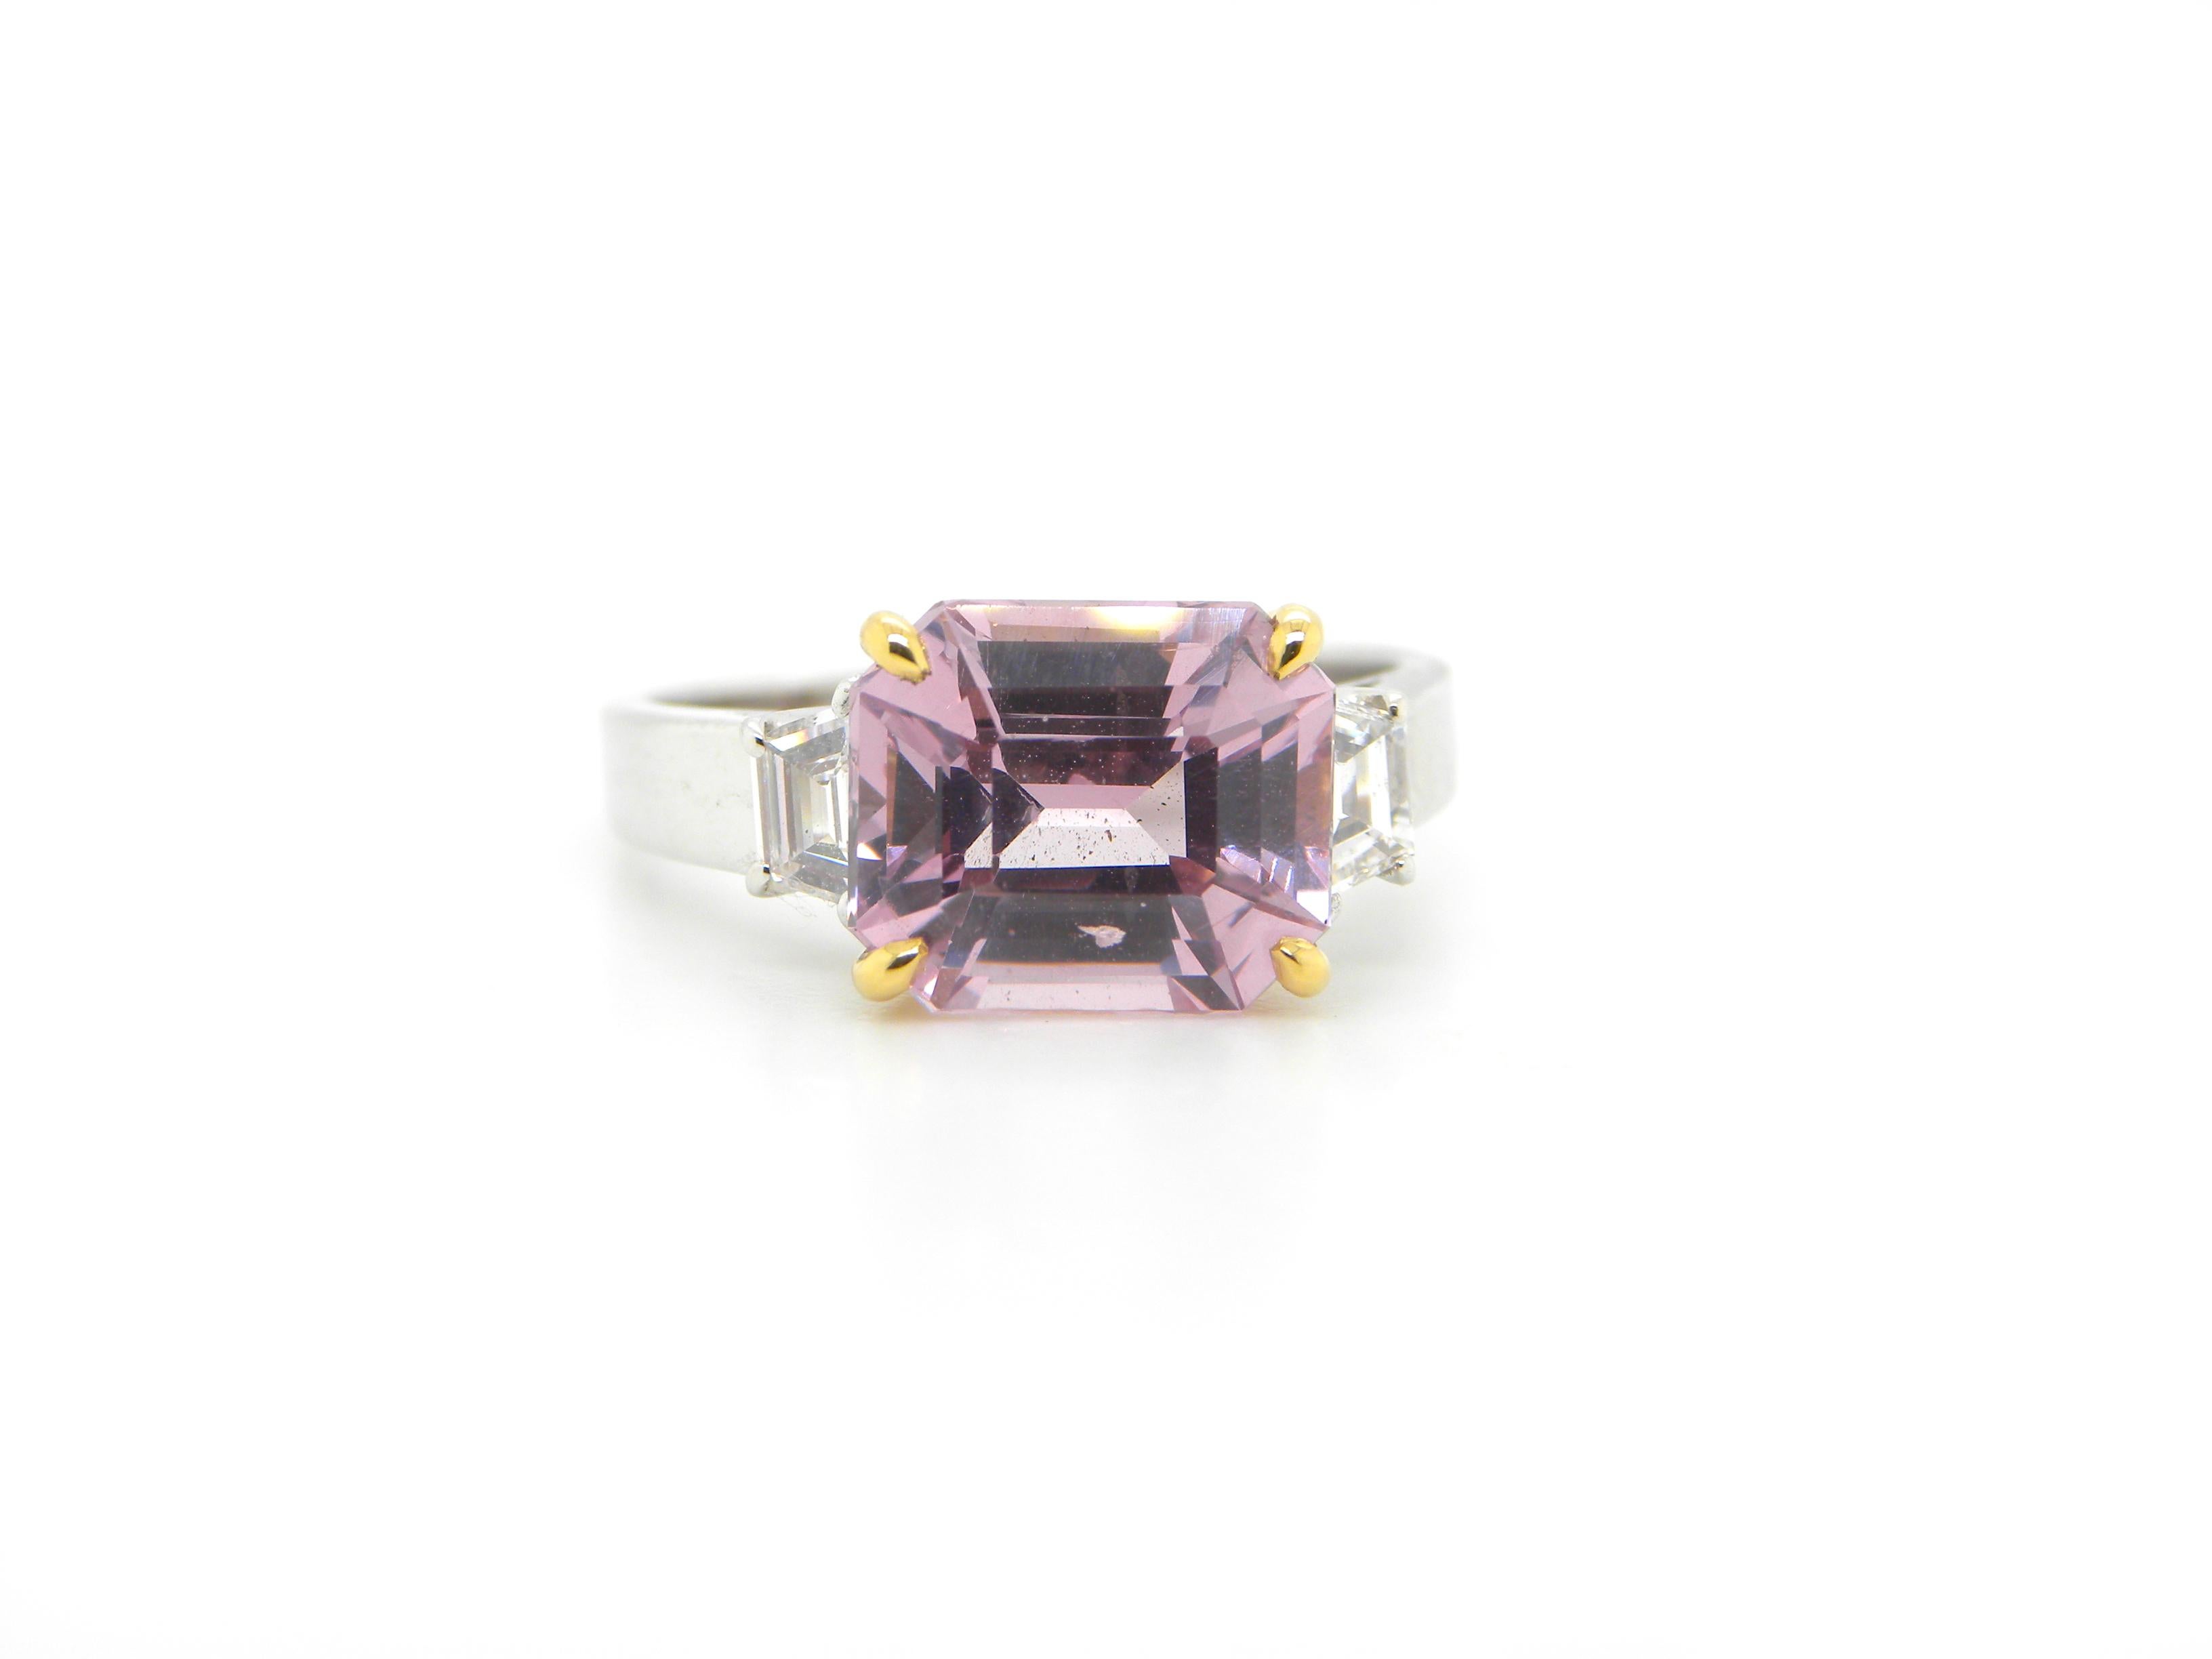 Contemporary 4.22 Carat Unheated Burmese Pink Spinel and White Diamond Engagement Ring